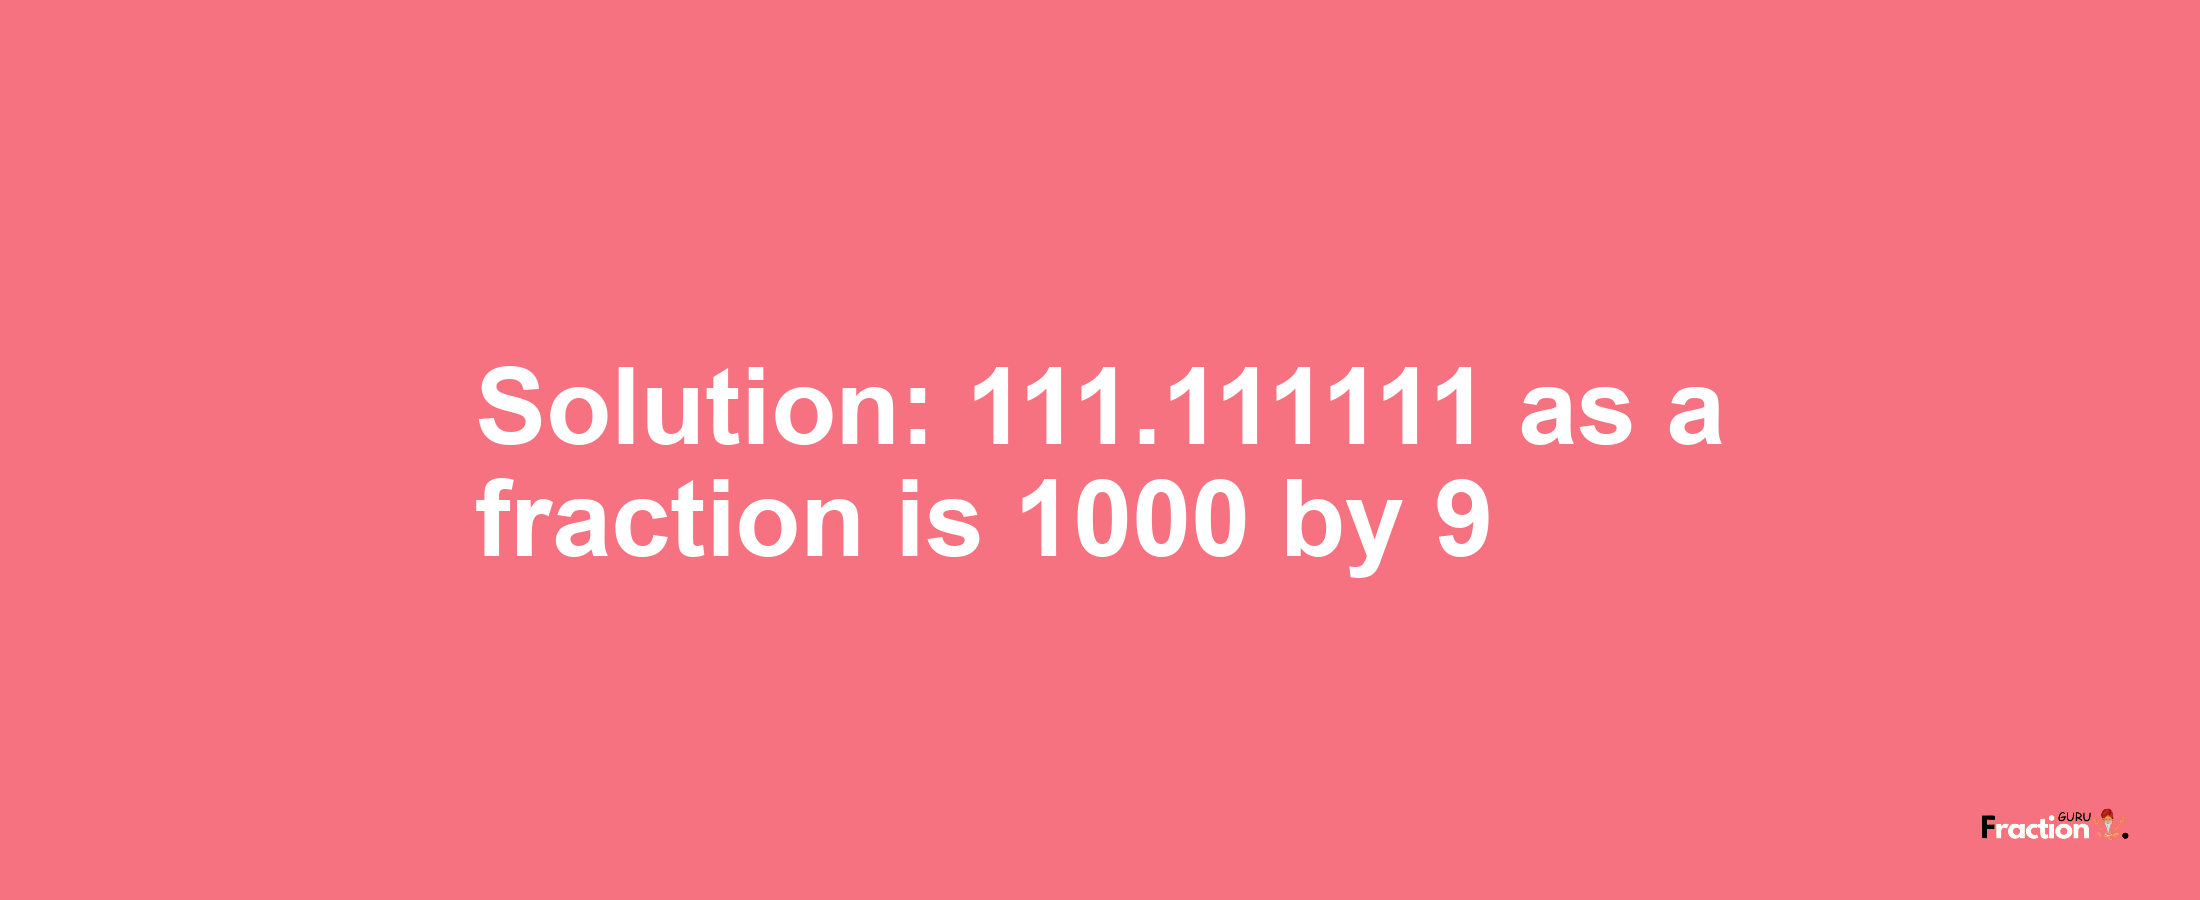 Solution:111.111111 as a fraction is 1000/9